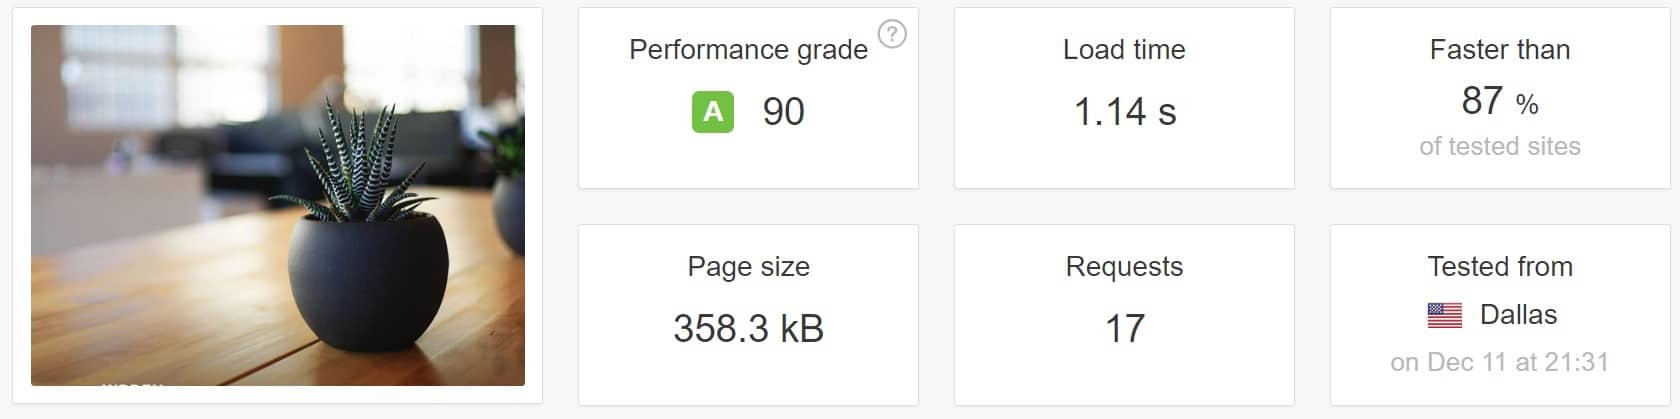 before pagespeed optimizations speed test